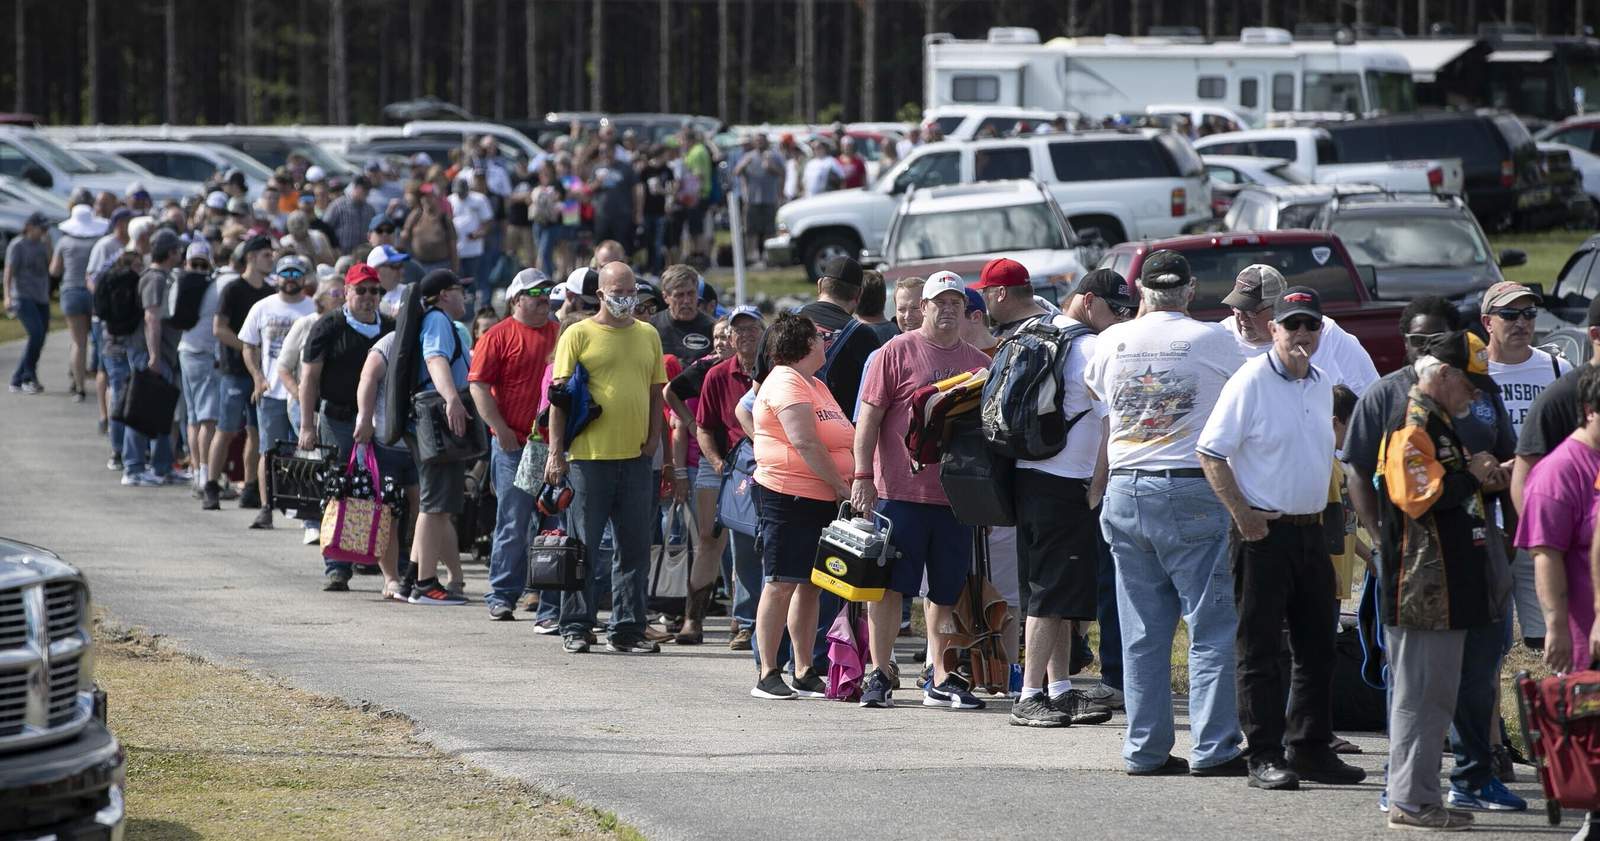 Judge orders N.C. track with large crowds to stop races